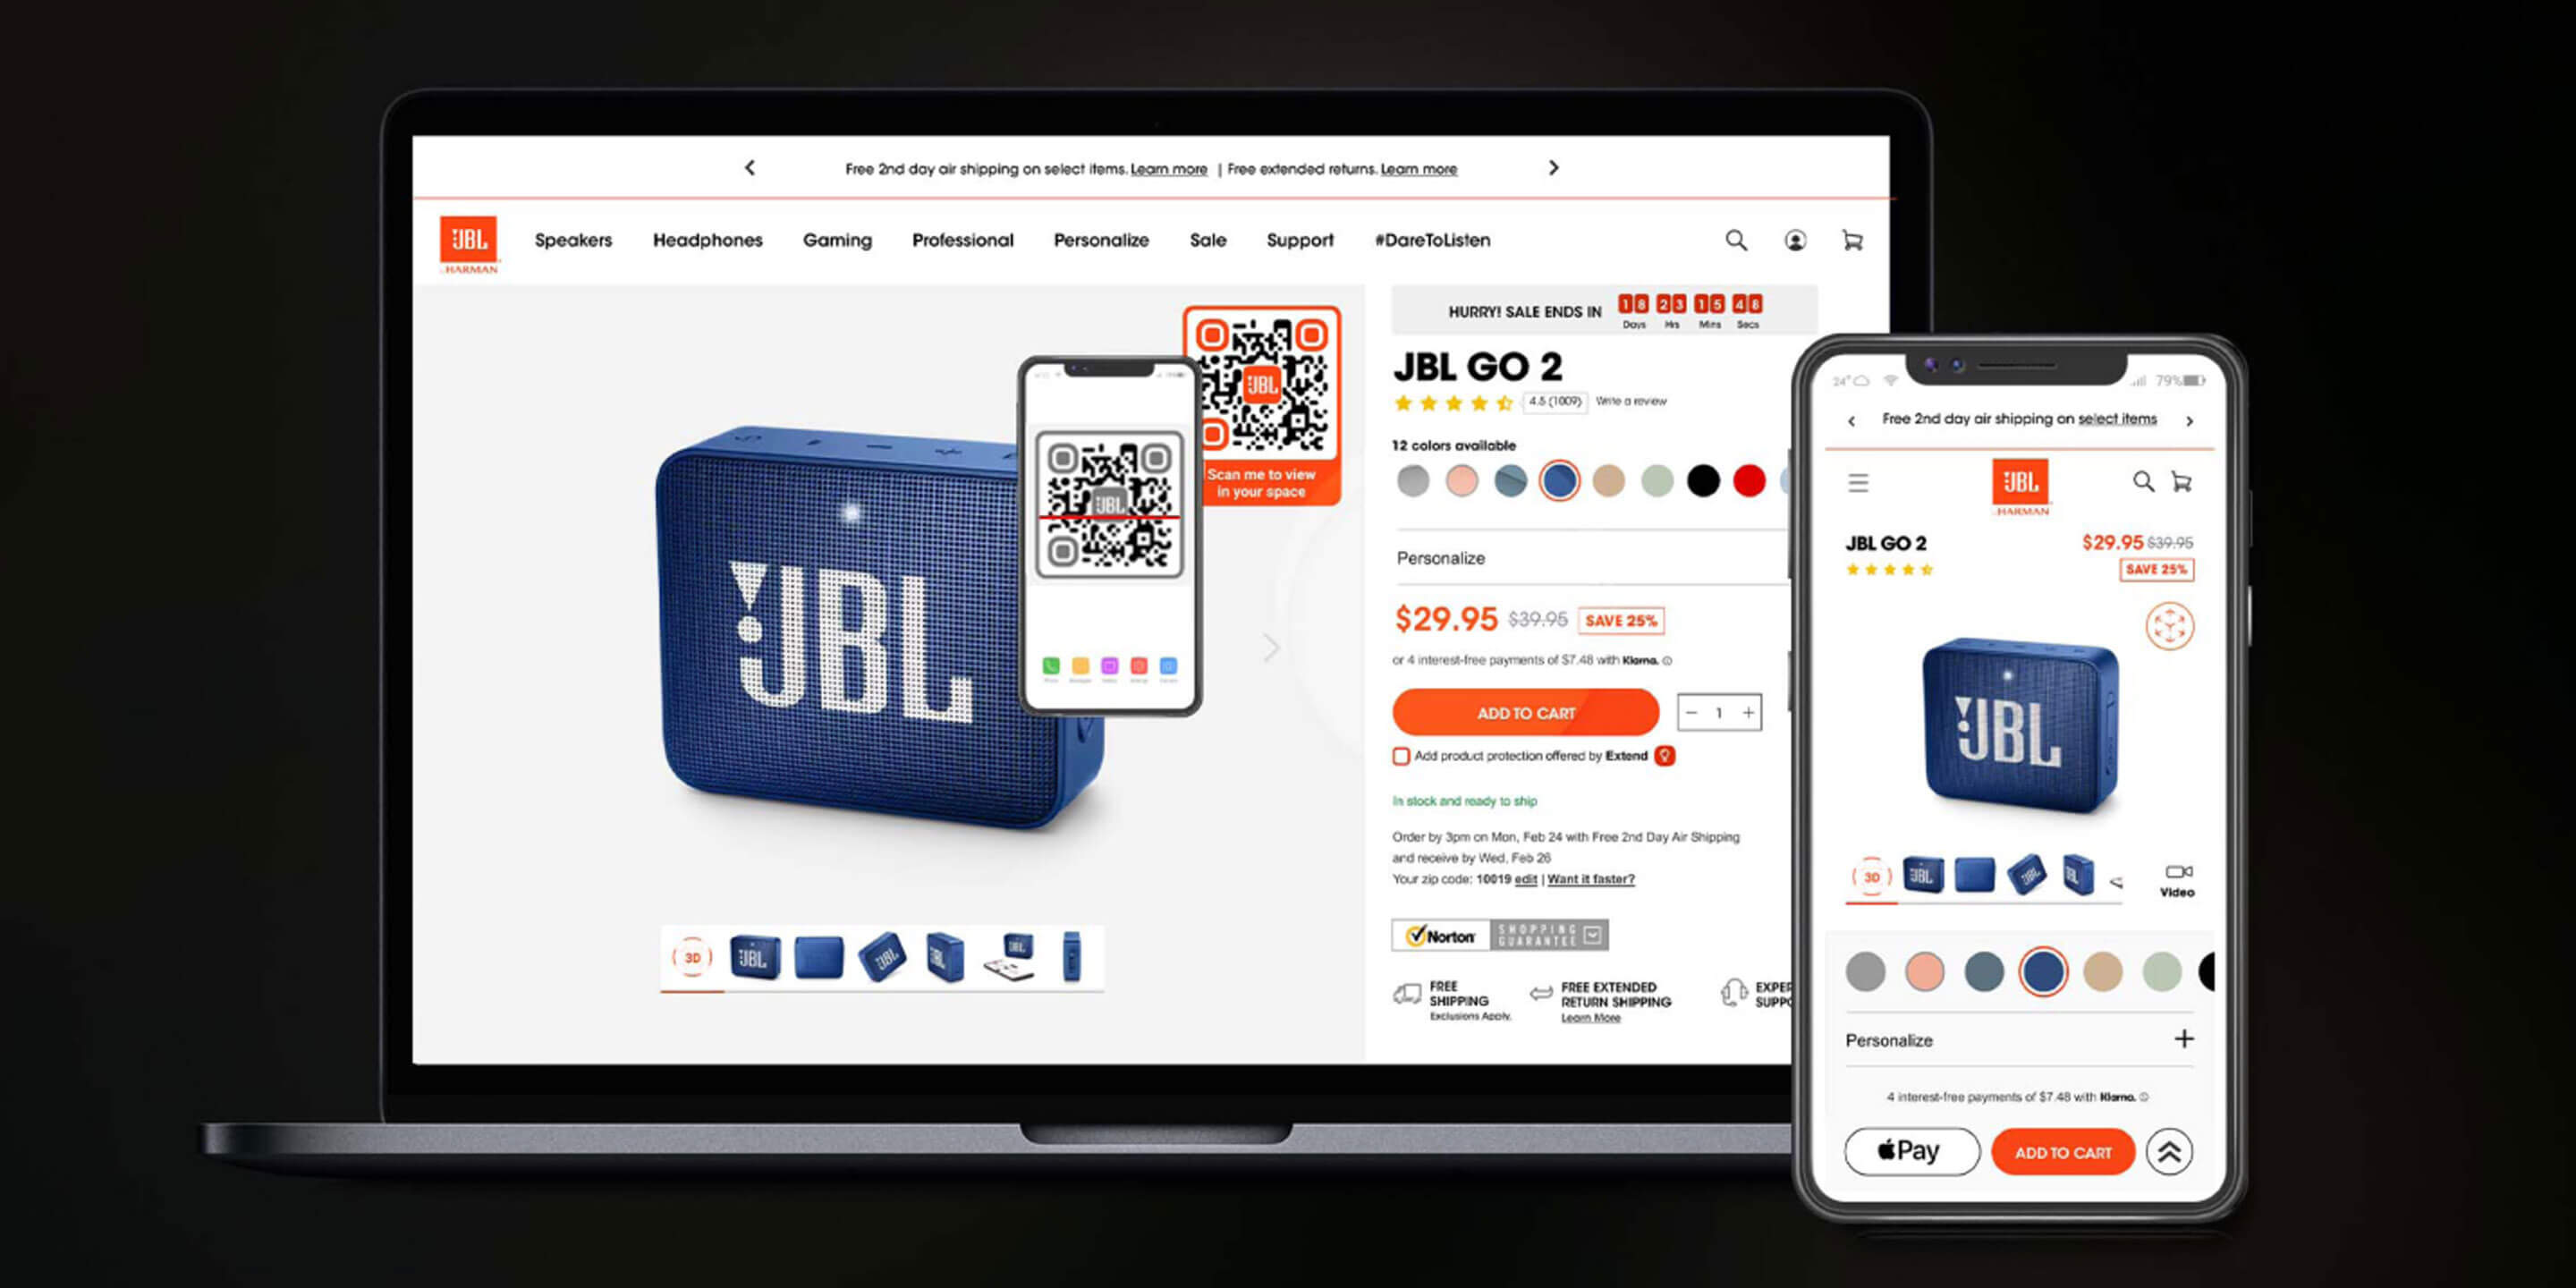 When redesigning the JBL website, Huemen incorporated the use of QR codes to allow a user to virtually experience JBL’s products in real time on their mobile device.